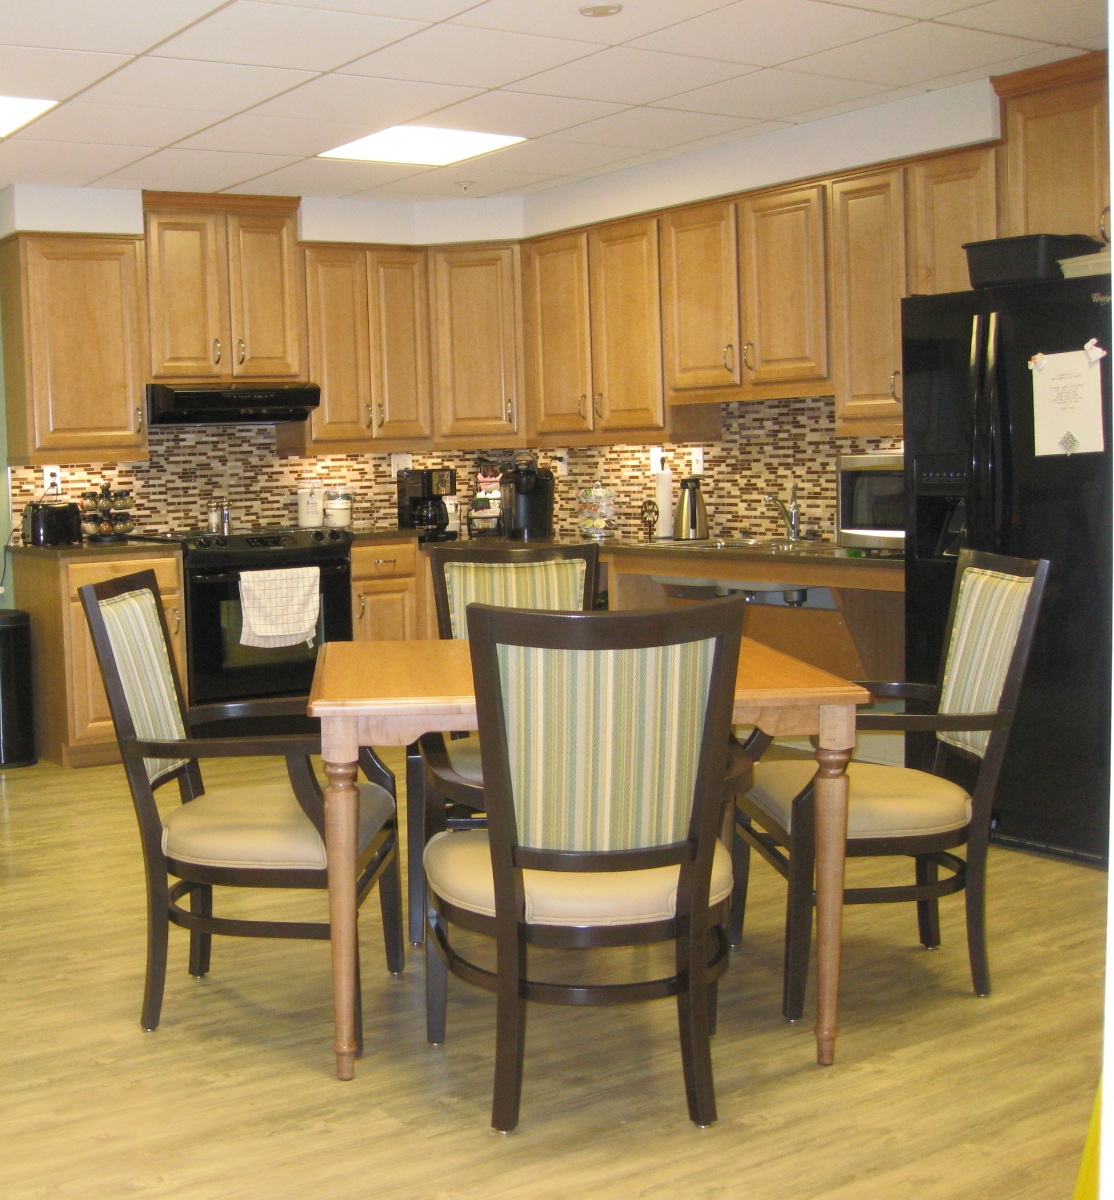 Personal Care Kitchen/Activity Area